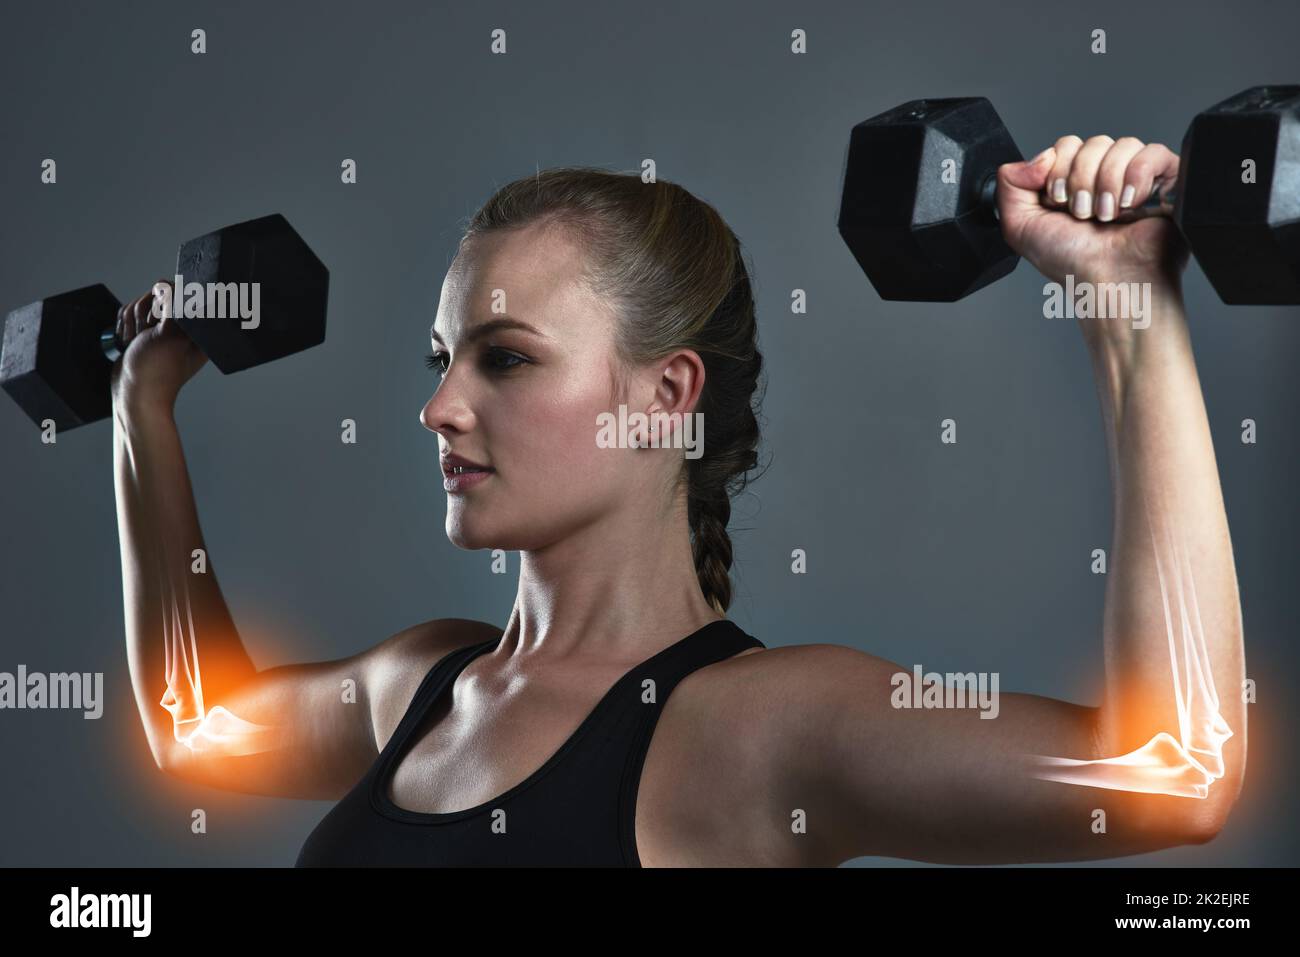 Its working right where I want it. Studio shot of a sporty young woman building muscle in her arms. Stock Photo